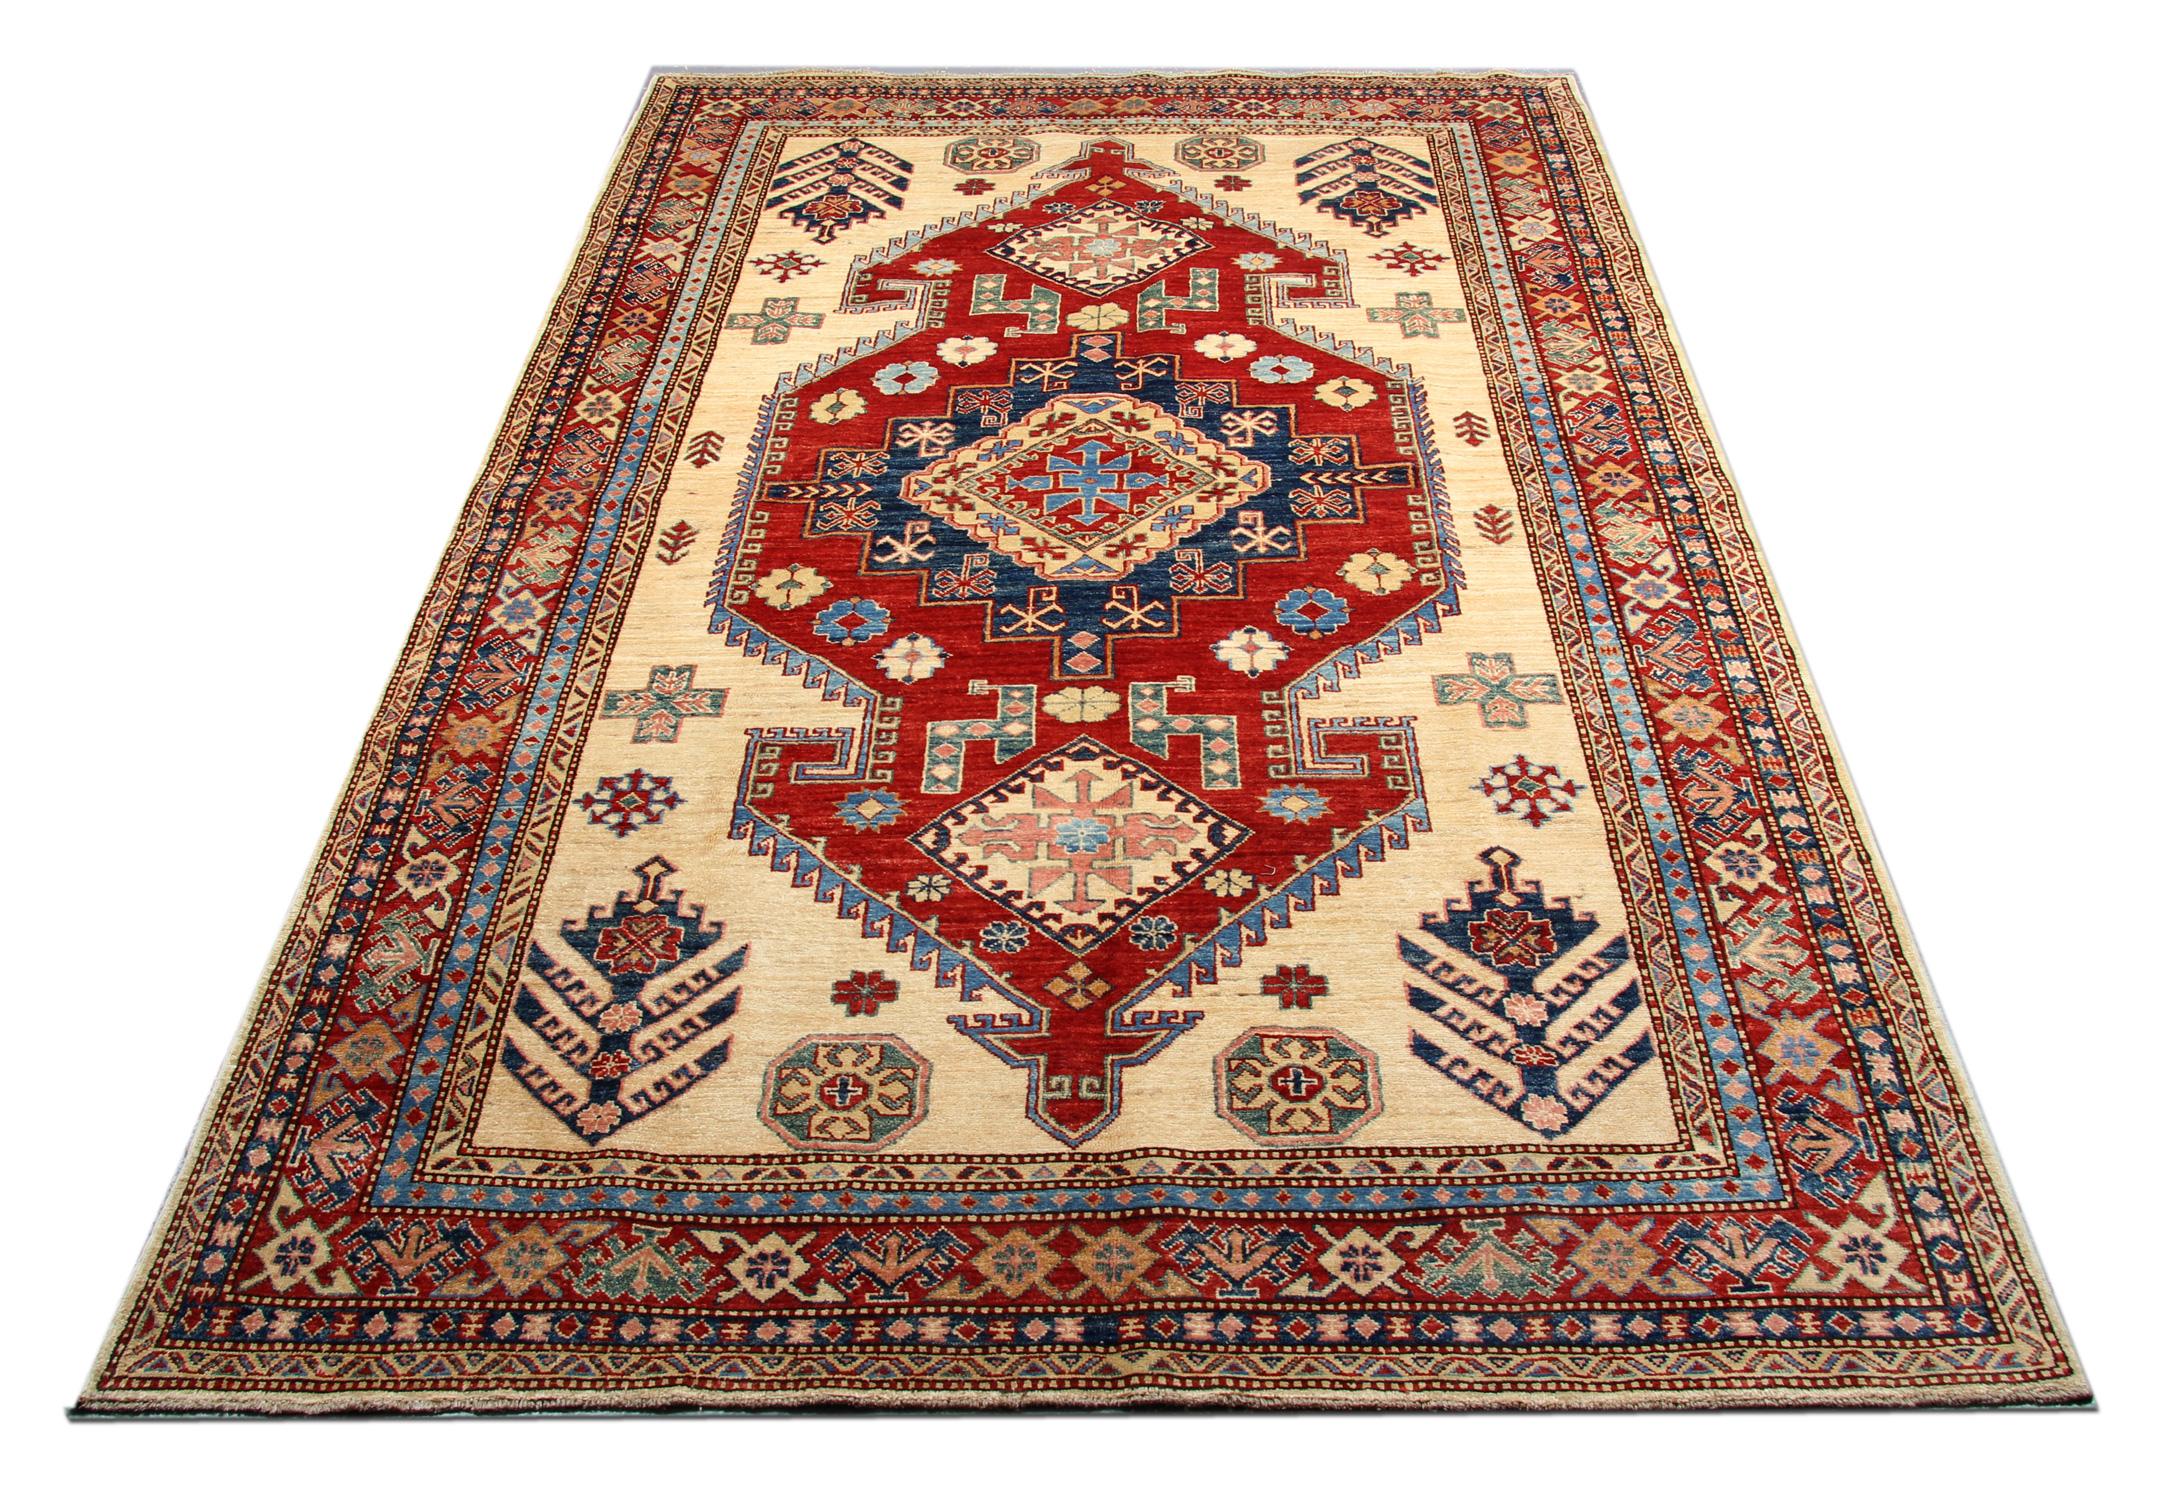 These new traditional handmade rugs feature designs from the Kazak region. A conventional tribal rug is famous in the part of Kazak Area. Afghan weavers have made this handwoven rug of top-quality wool and cotton. This carpet rug features typical